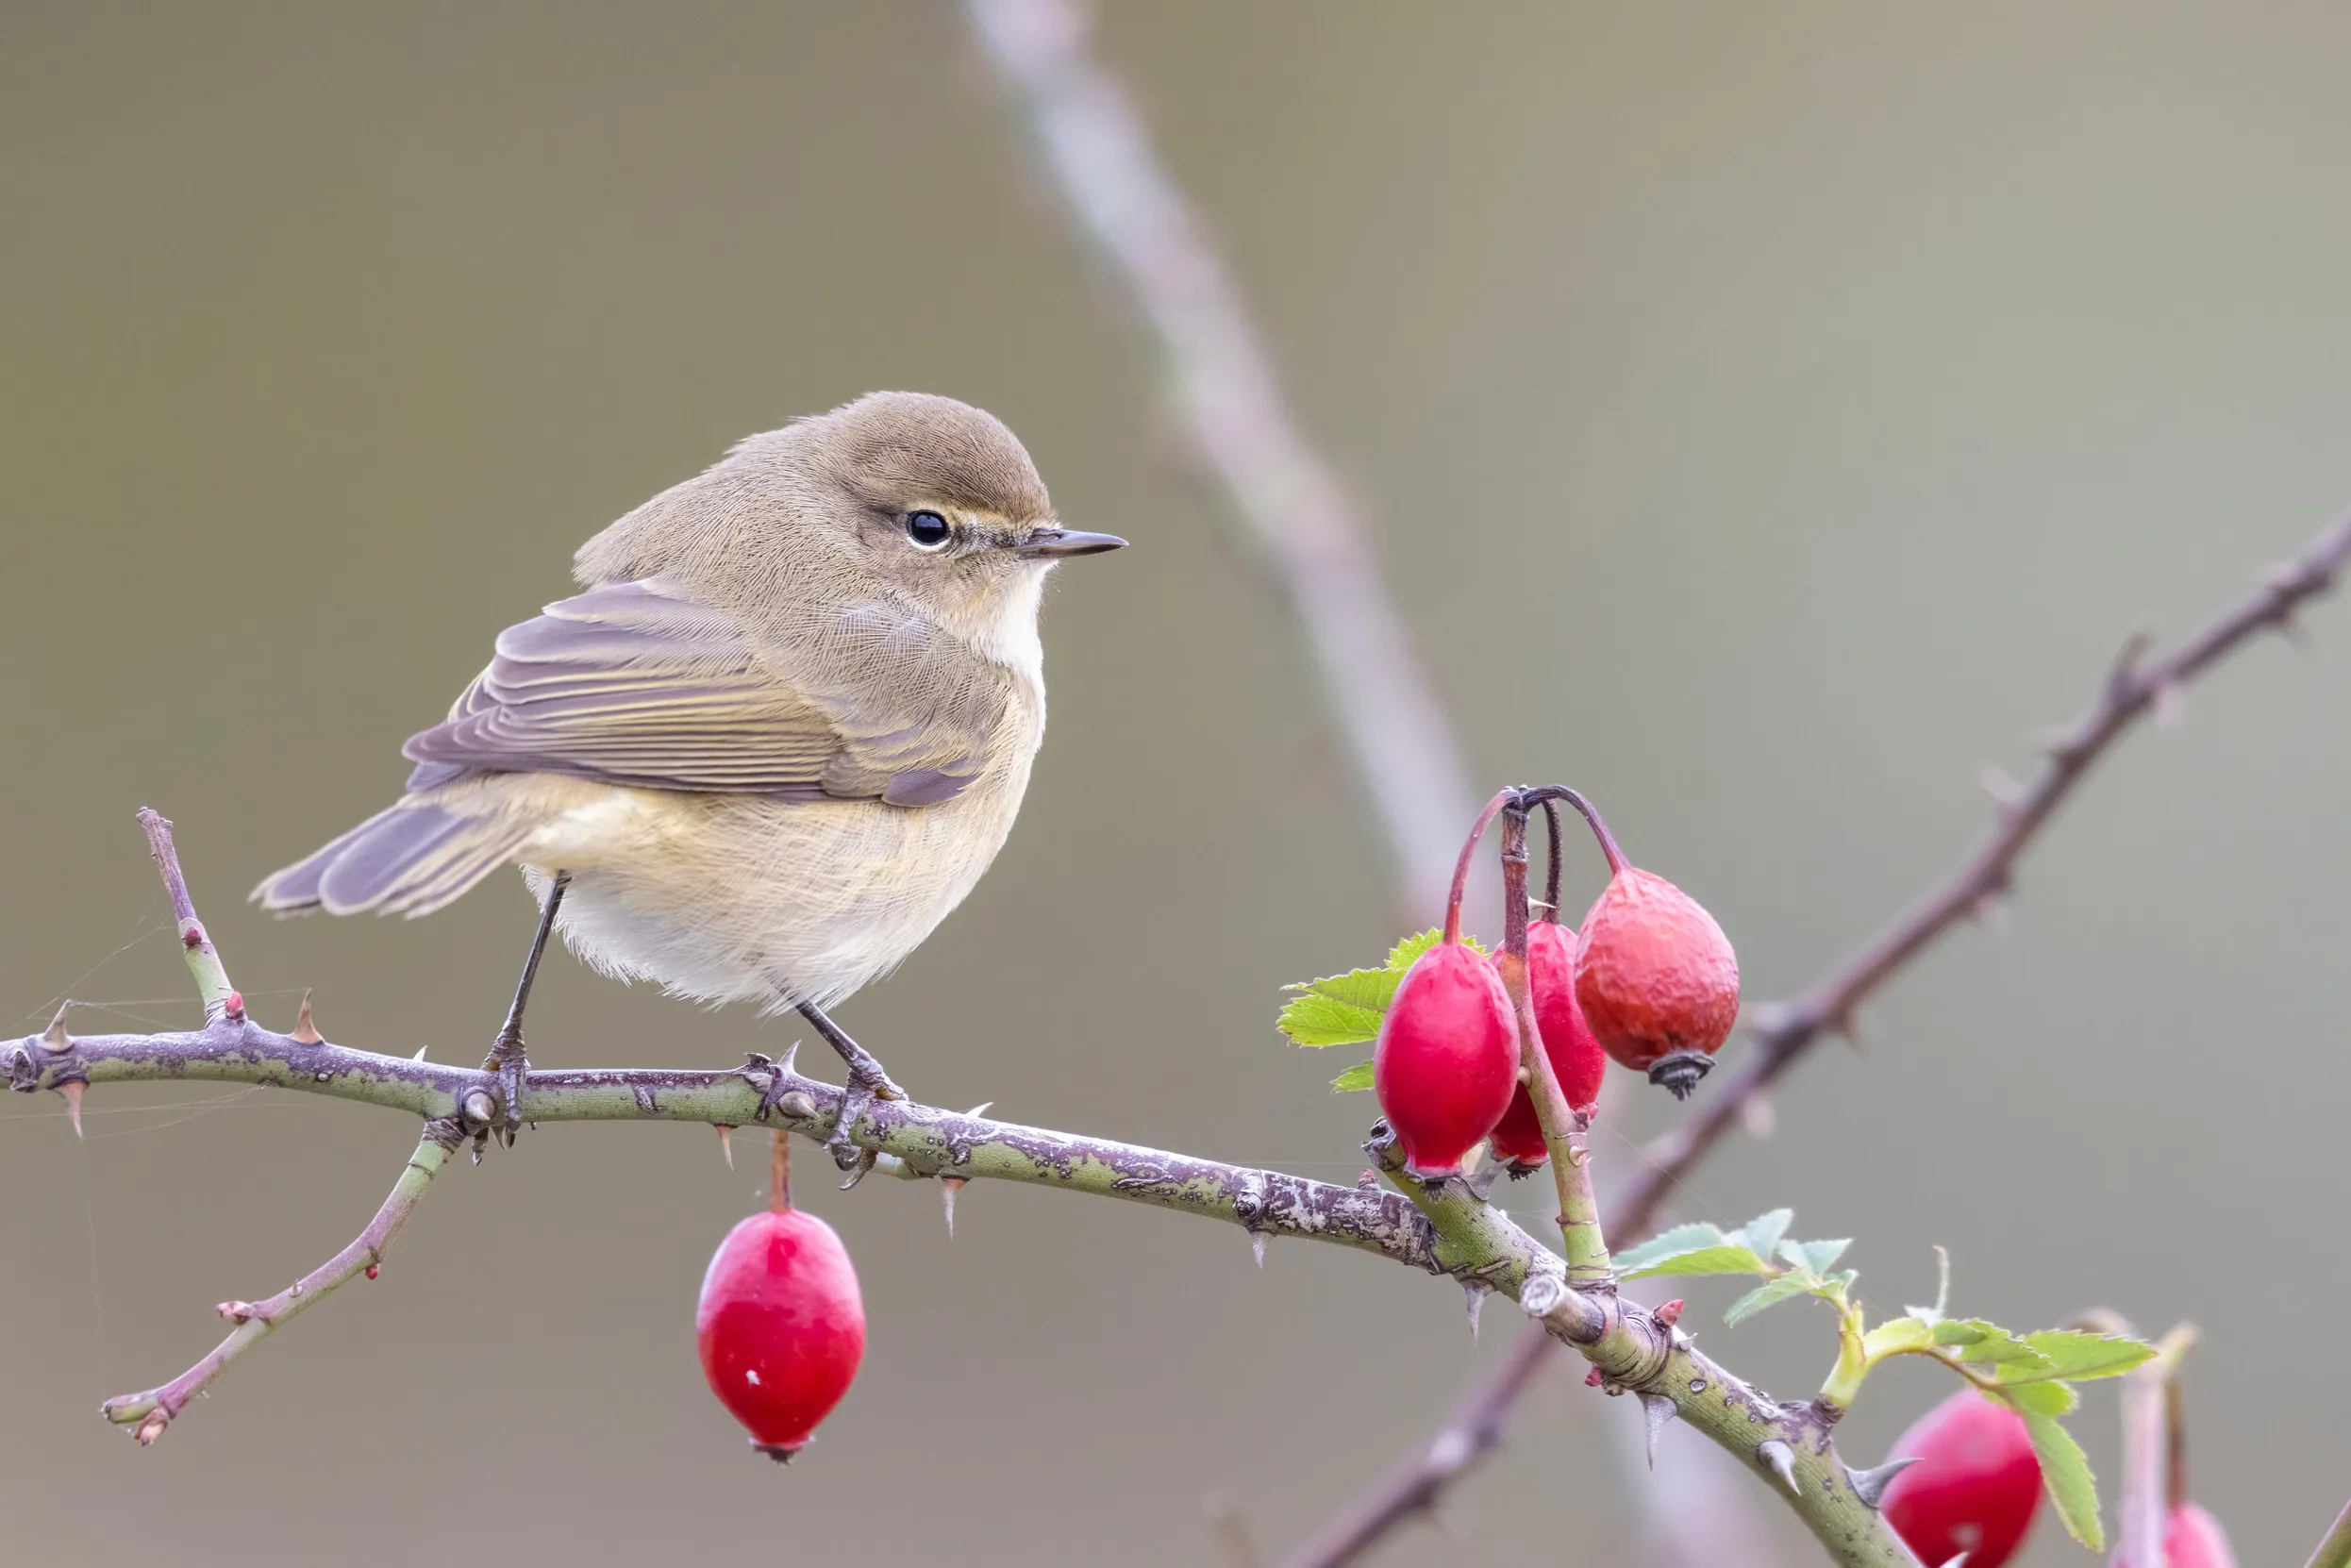 Small Chiffchaff perched on a thin branch with red berries